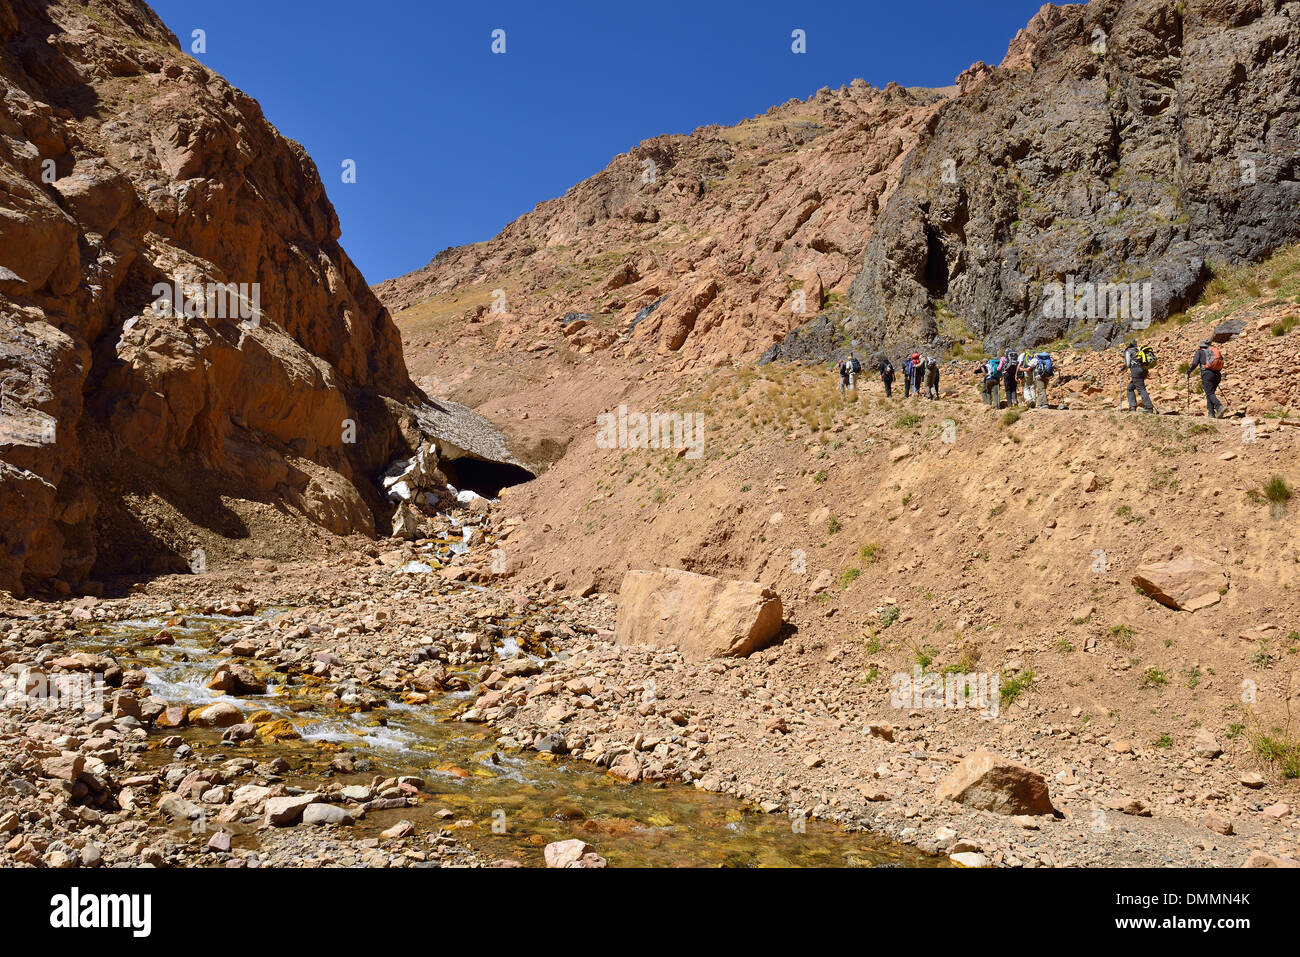 Iran, group of people hiking in Khoram Dasht valley, Alam Kuh area, Alborz mountains Stock Photo